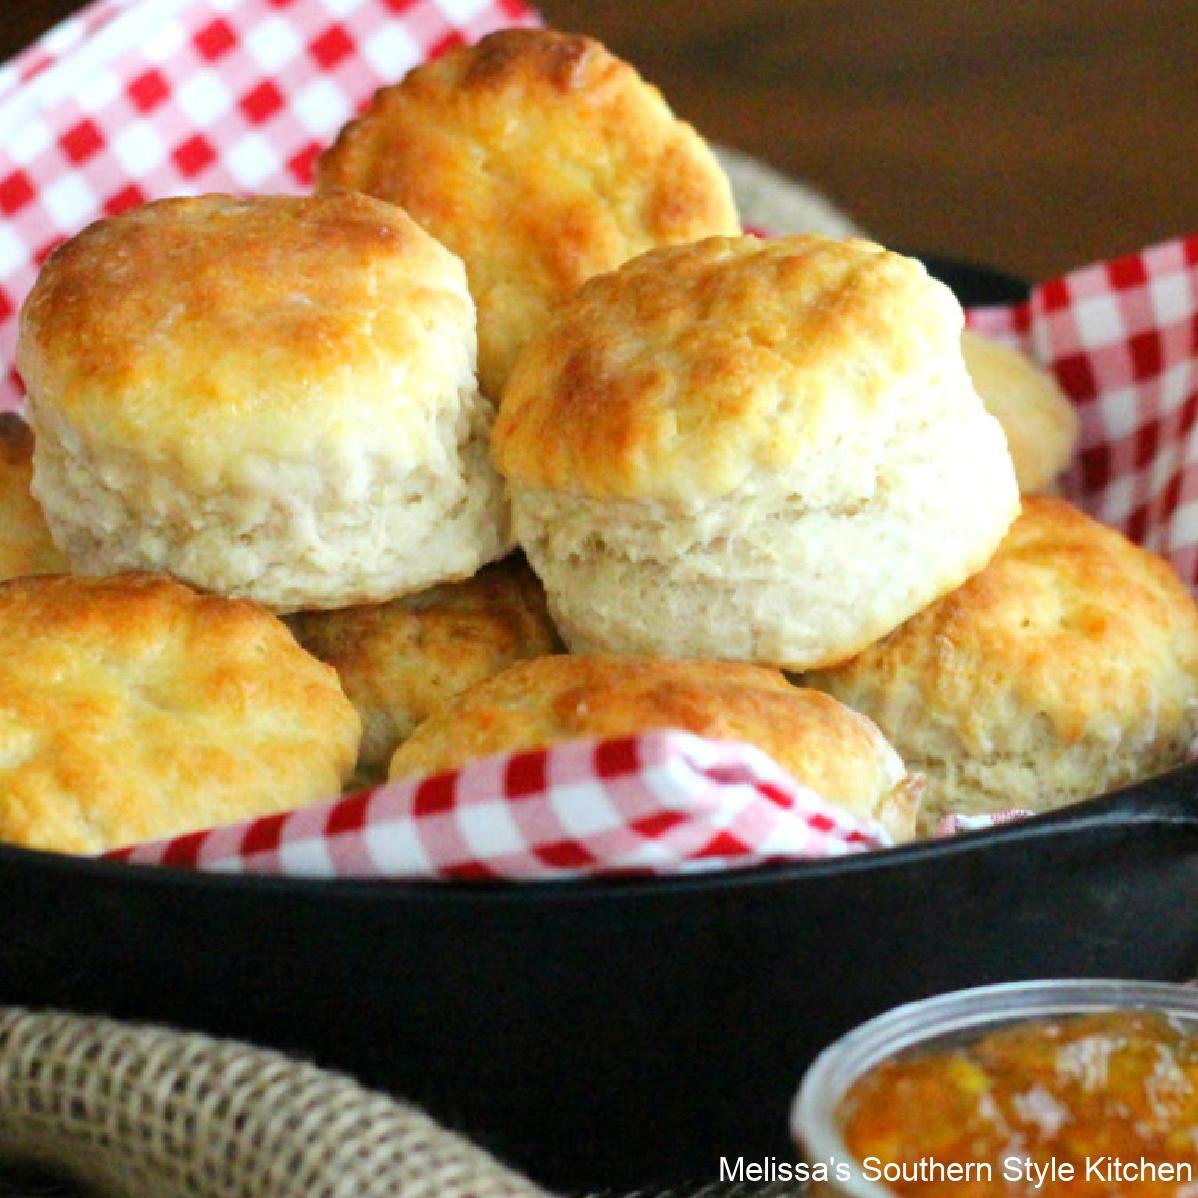  Once you try these biscuits, you'll never want to buy store-bought again